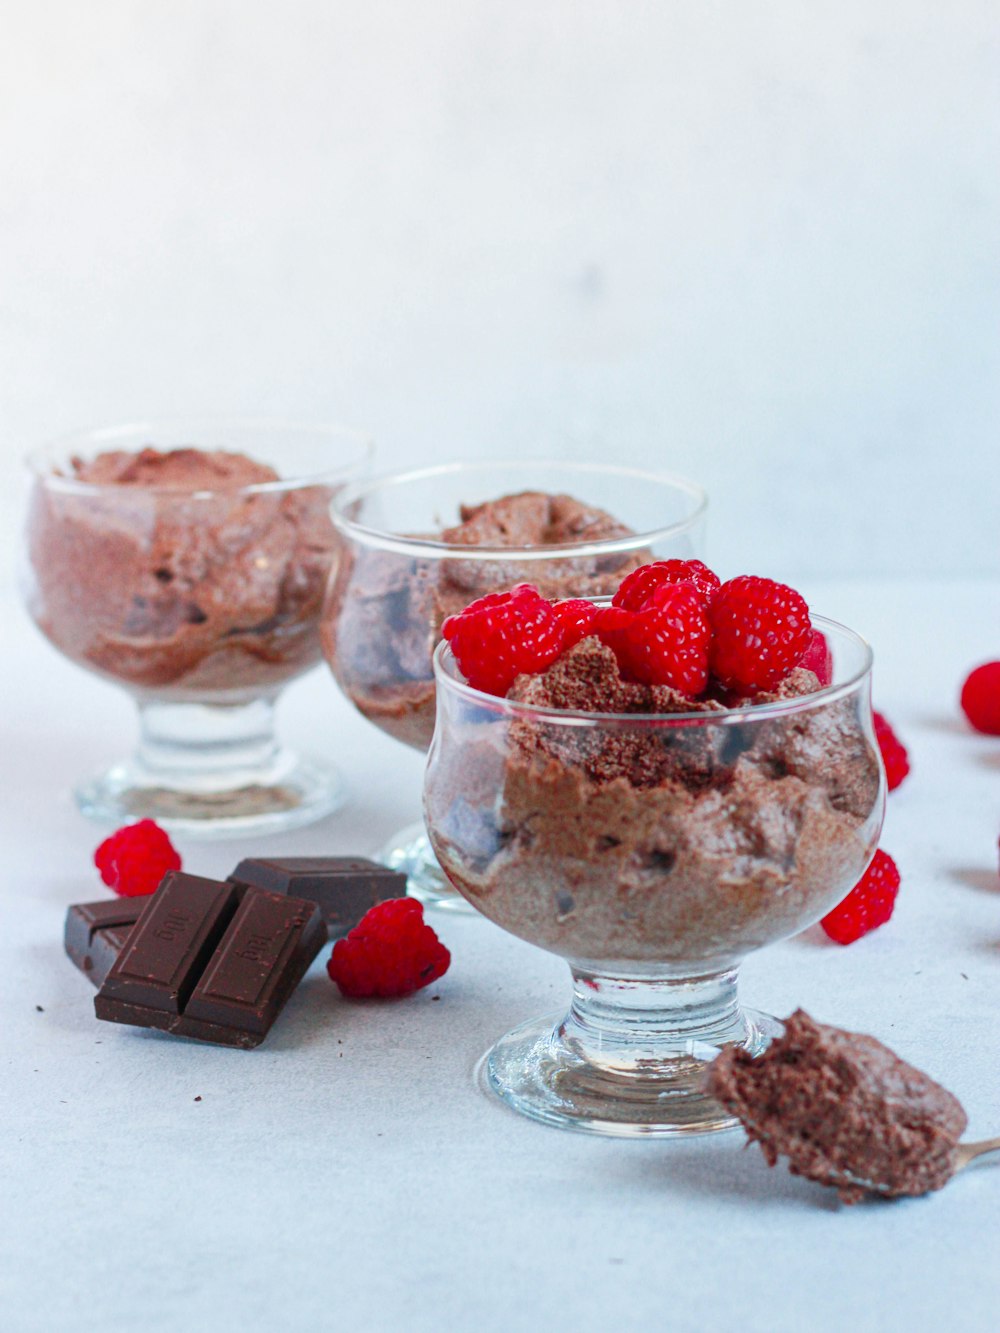 ice cream in clear glass bowl